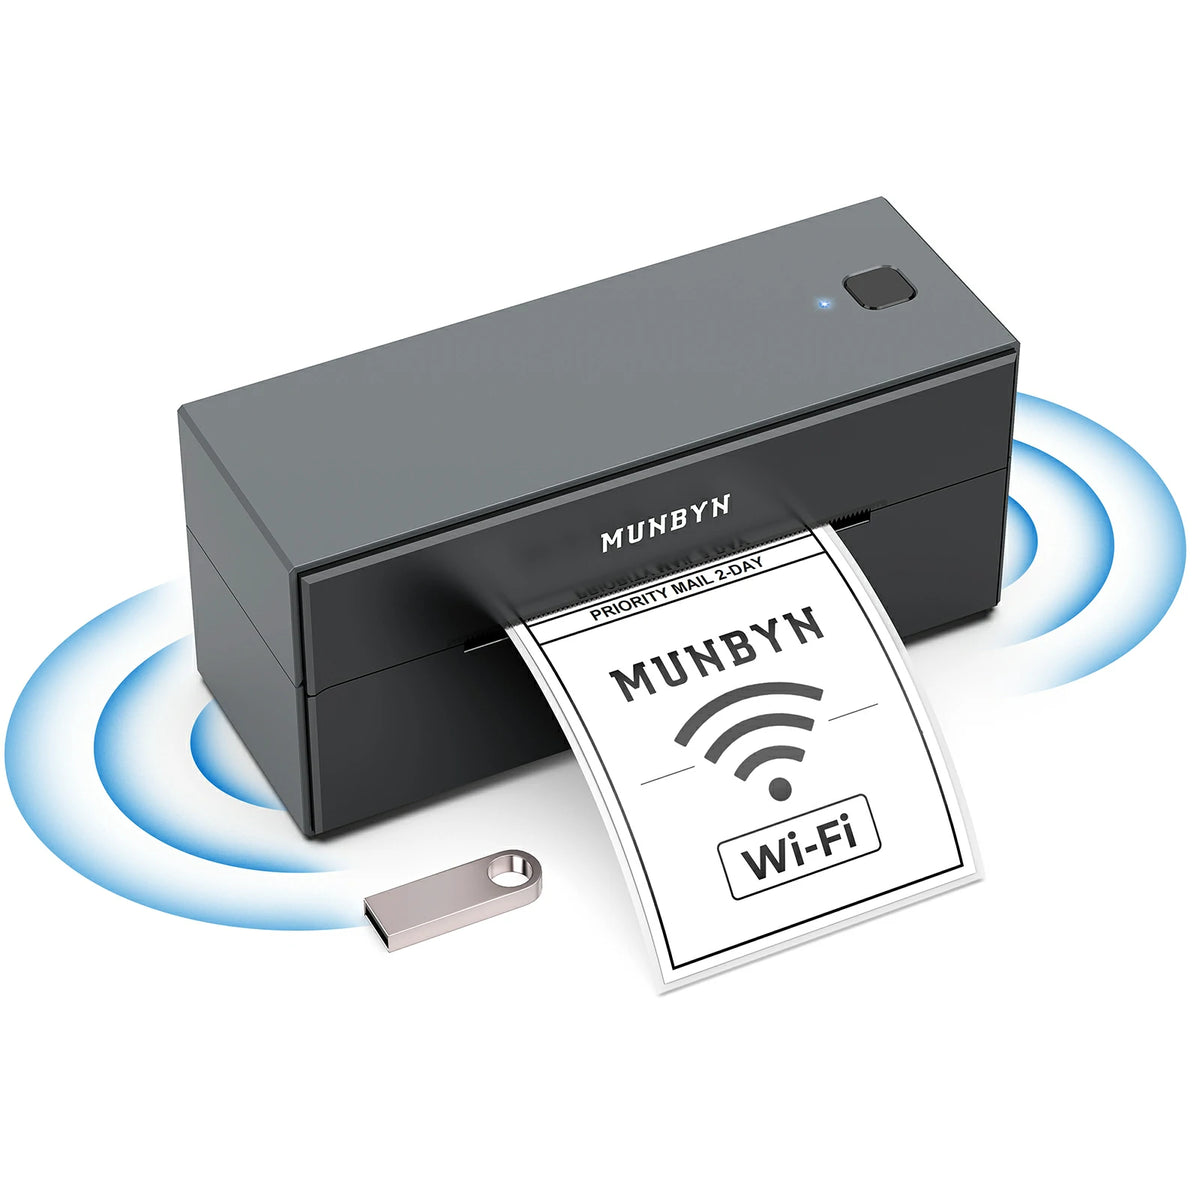 MUNBYN P129S wireless printer connects easily to your devices through WiFi, allowing for seamless integration into your existing workflow.